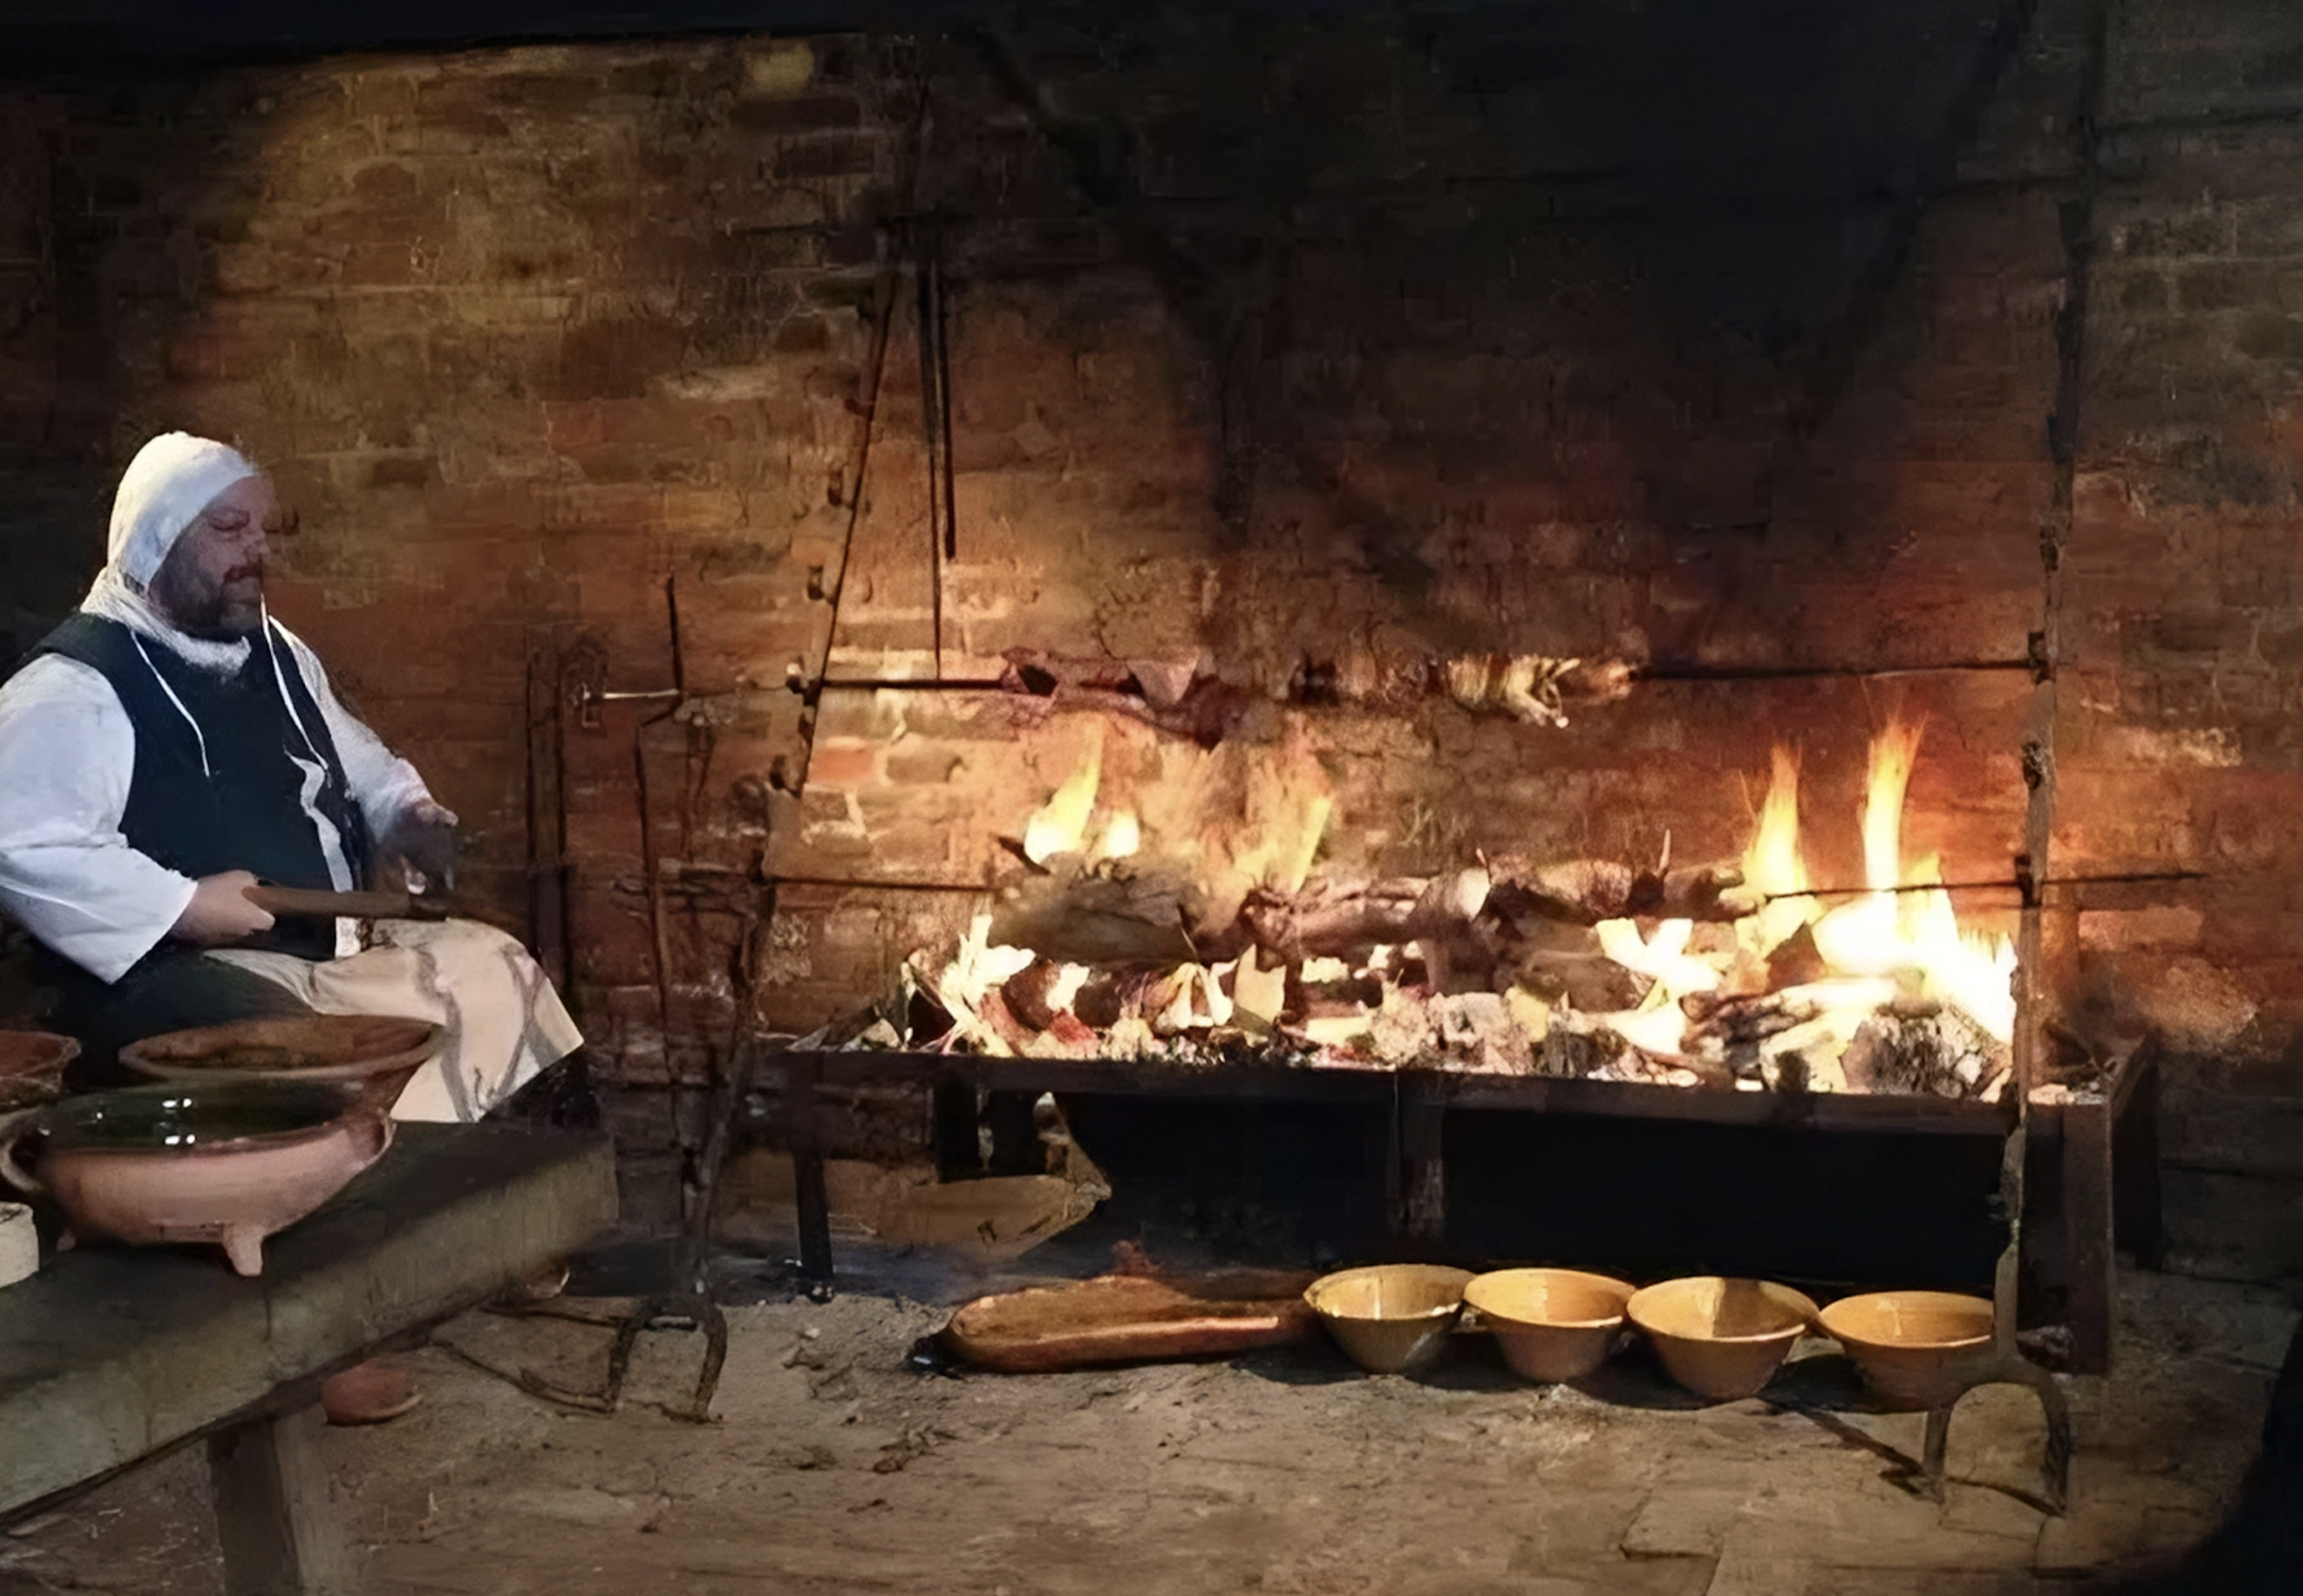 Grilling in a castle fireplace with manual turnspits